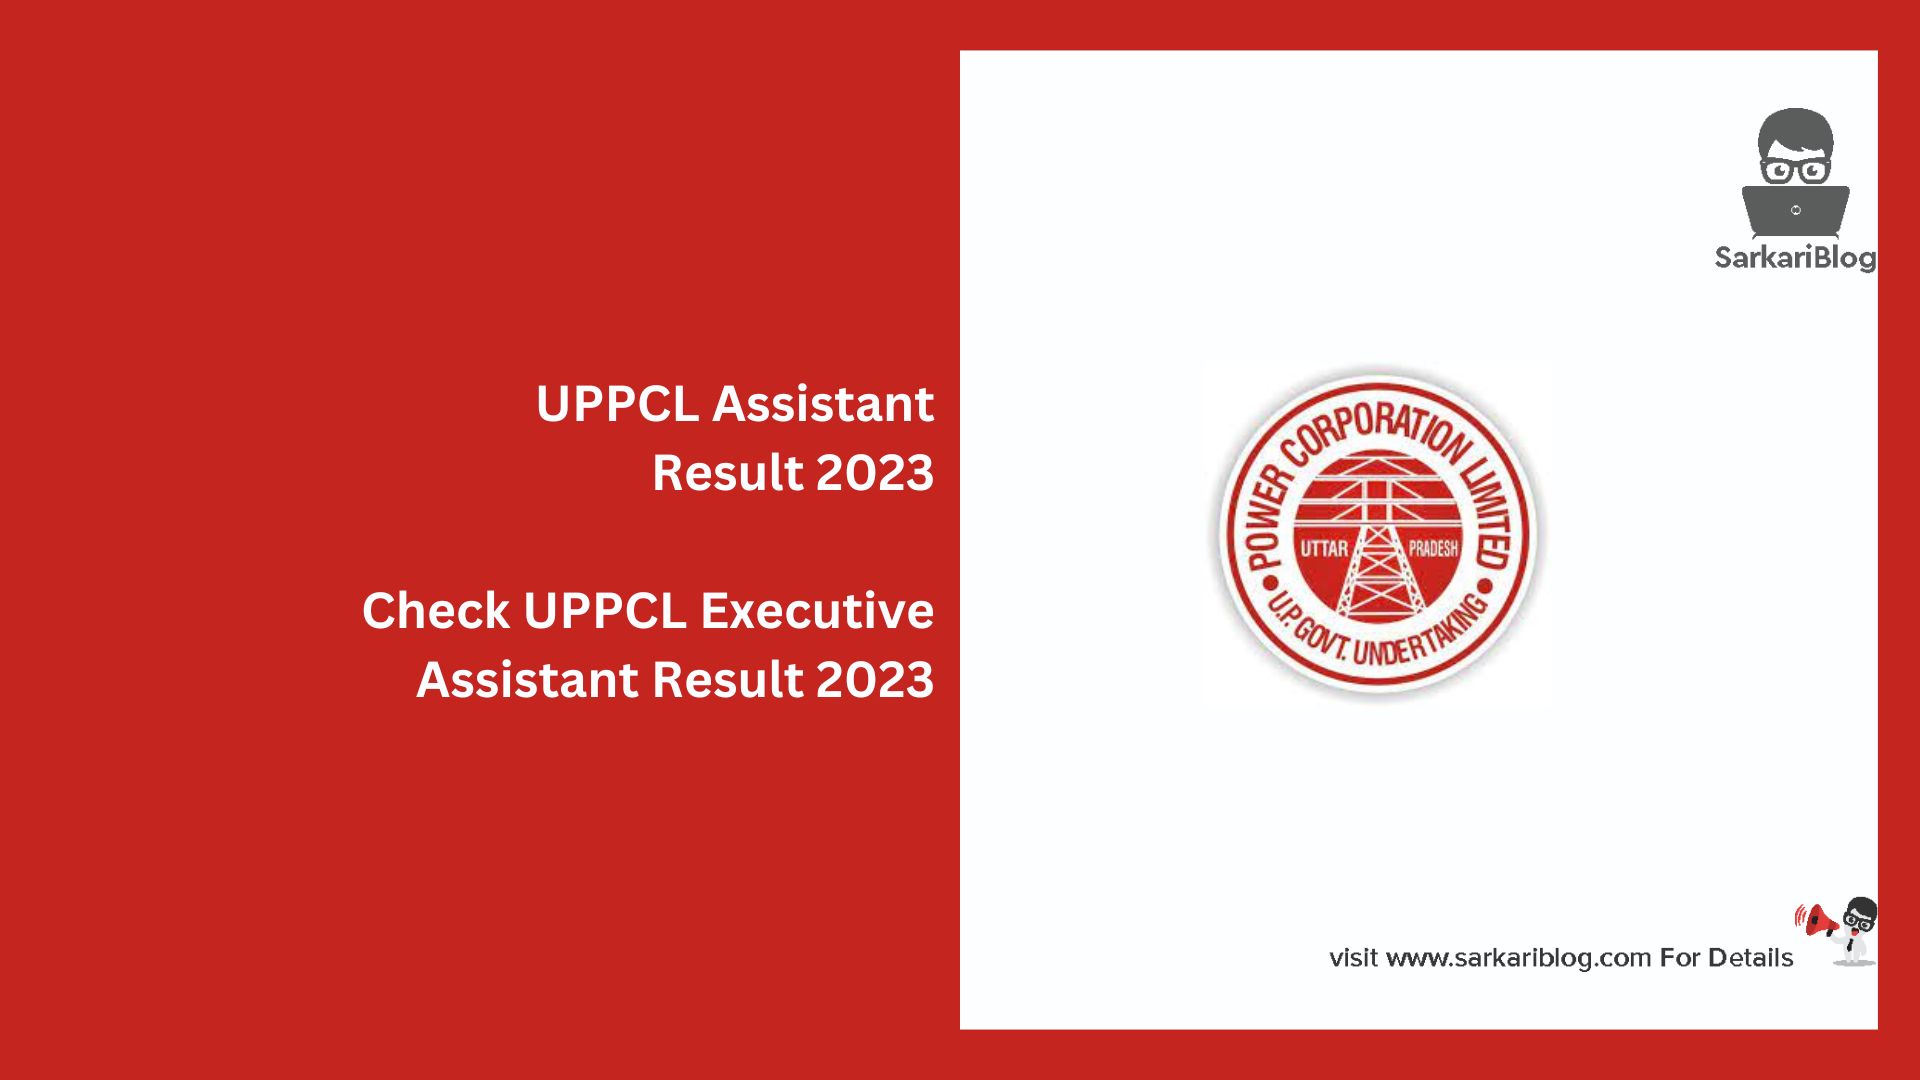 UPPCL Assistant Result 2023